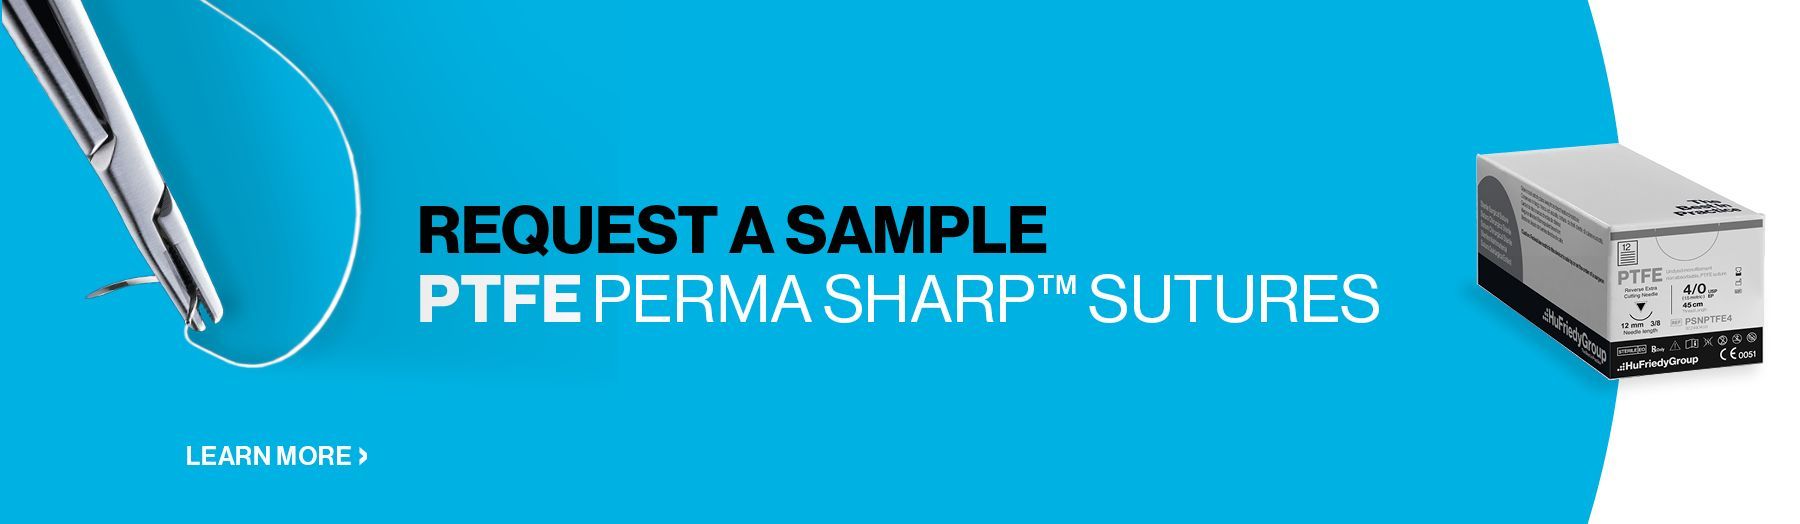 Request a sample of PTFE Perma Sharp Sutures